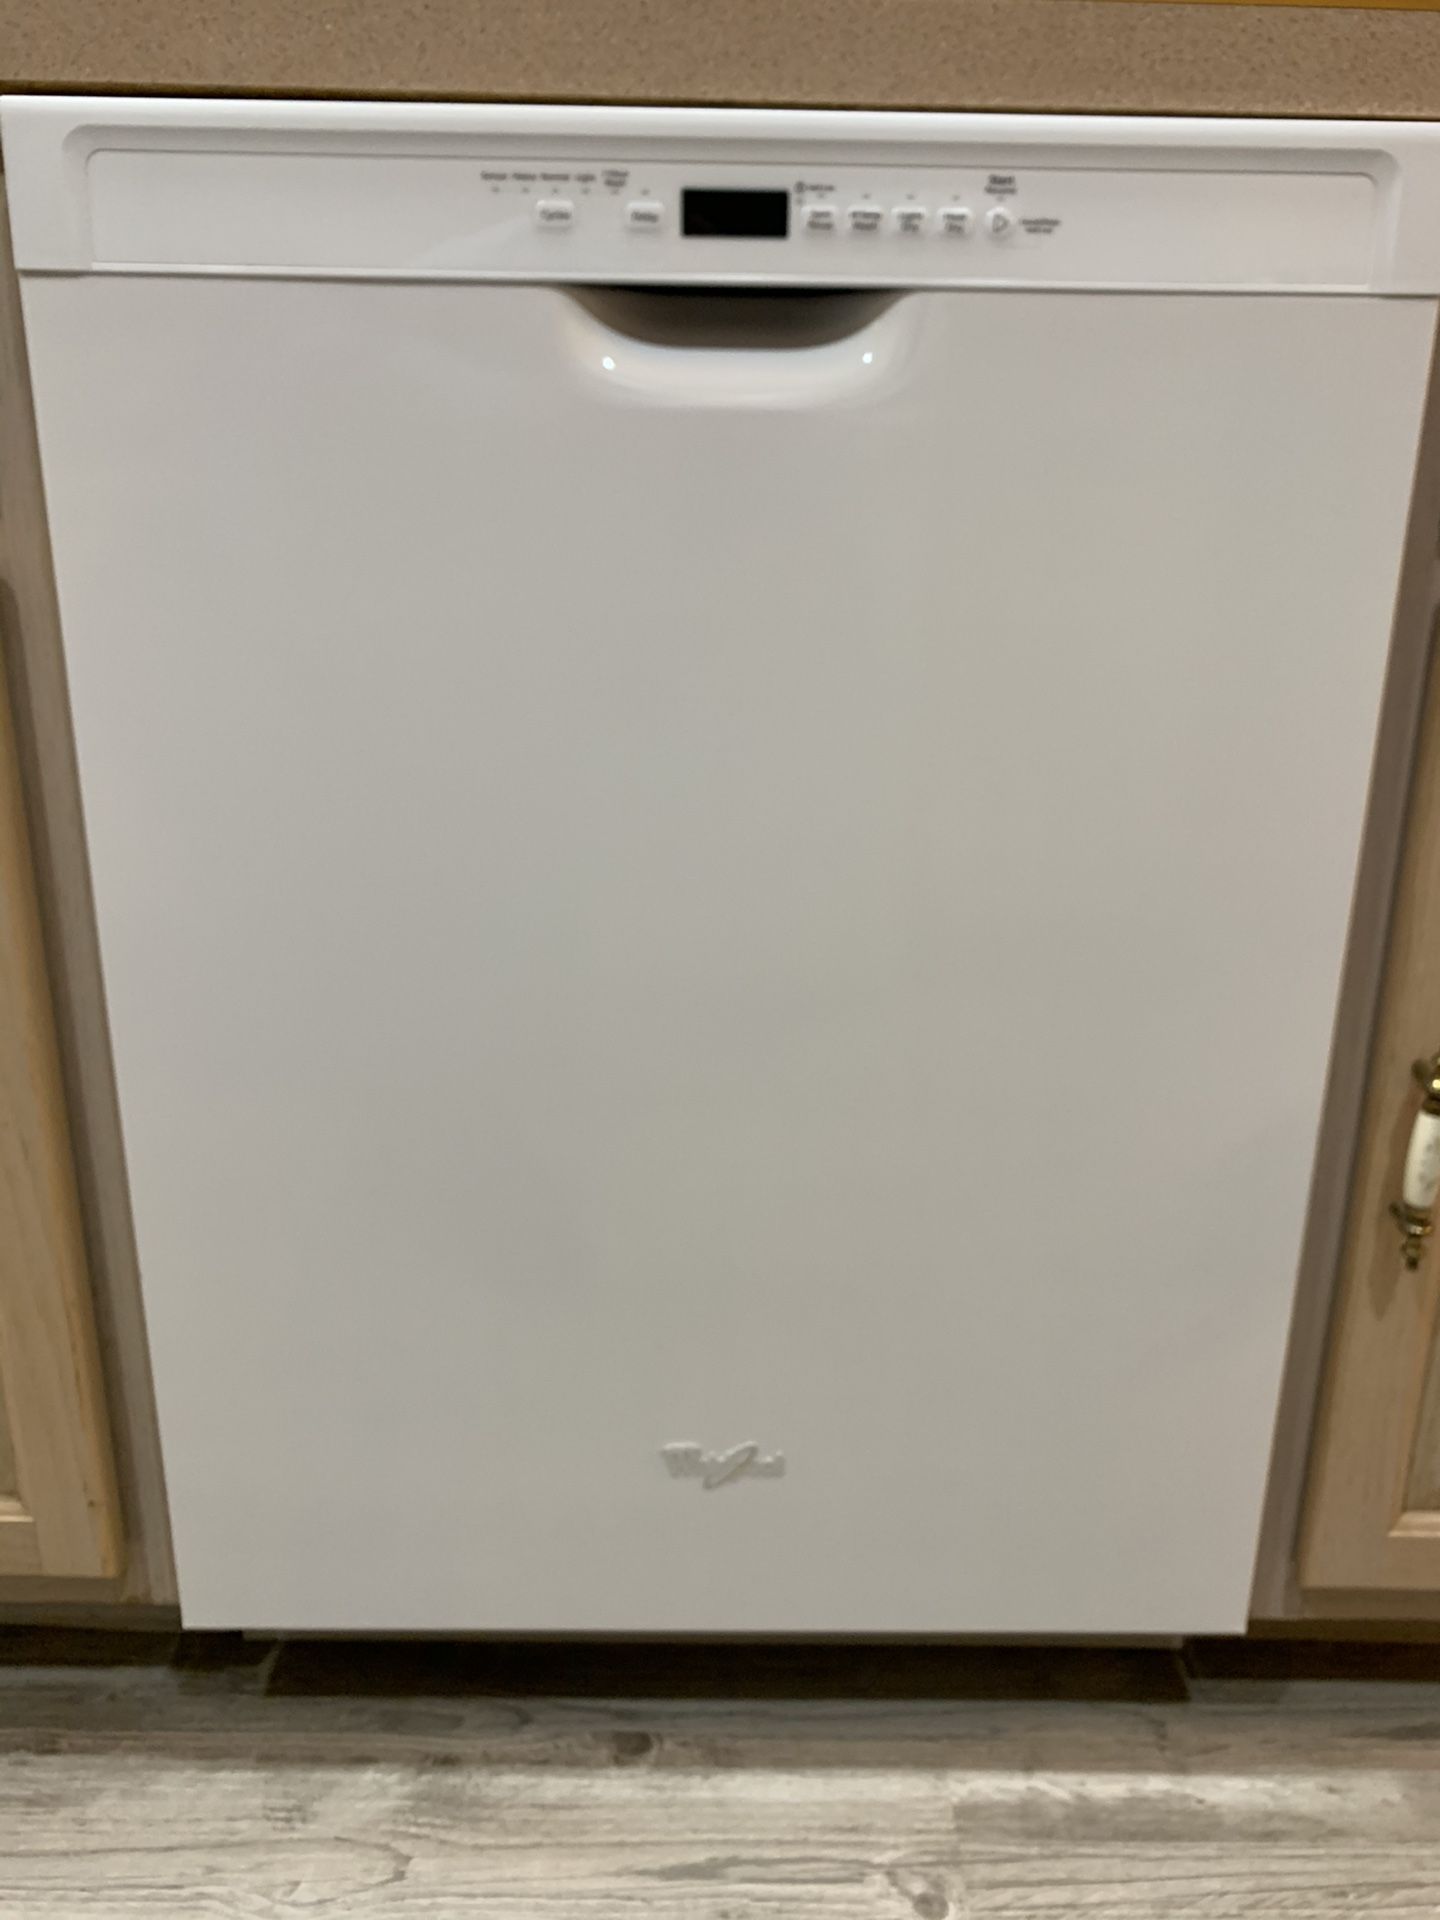 Whirlpool Dishwasher Stainless Steel Tub 2 Years Young *Price Reduced now only $110.00 wont last at this price.